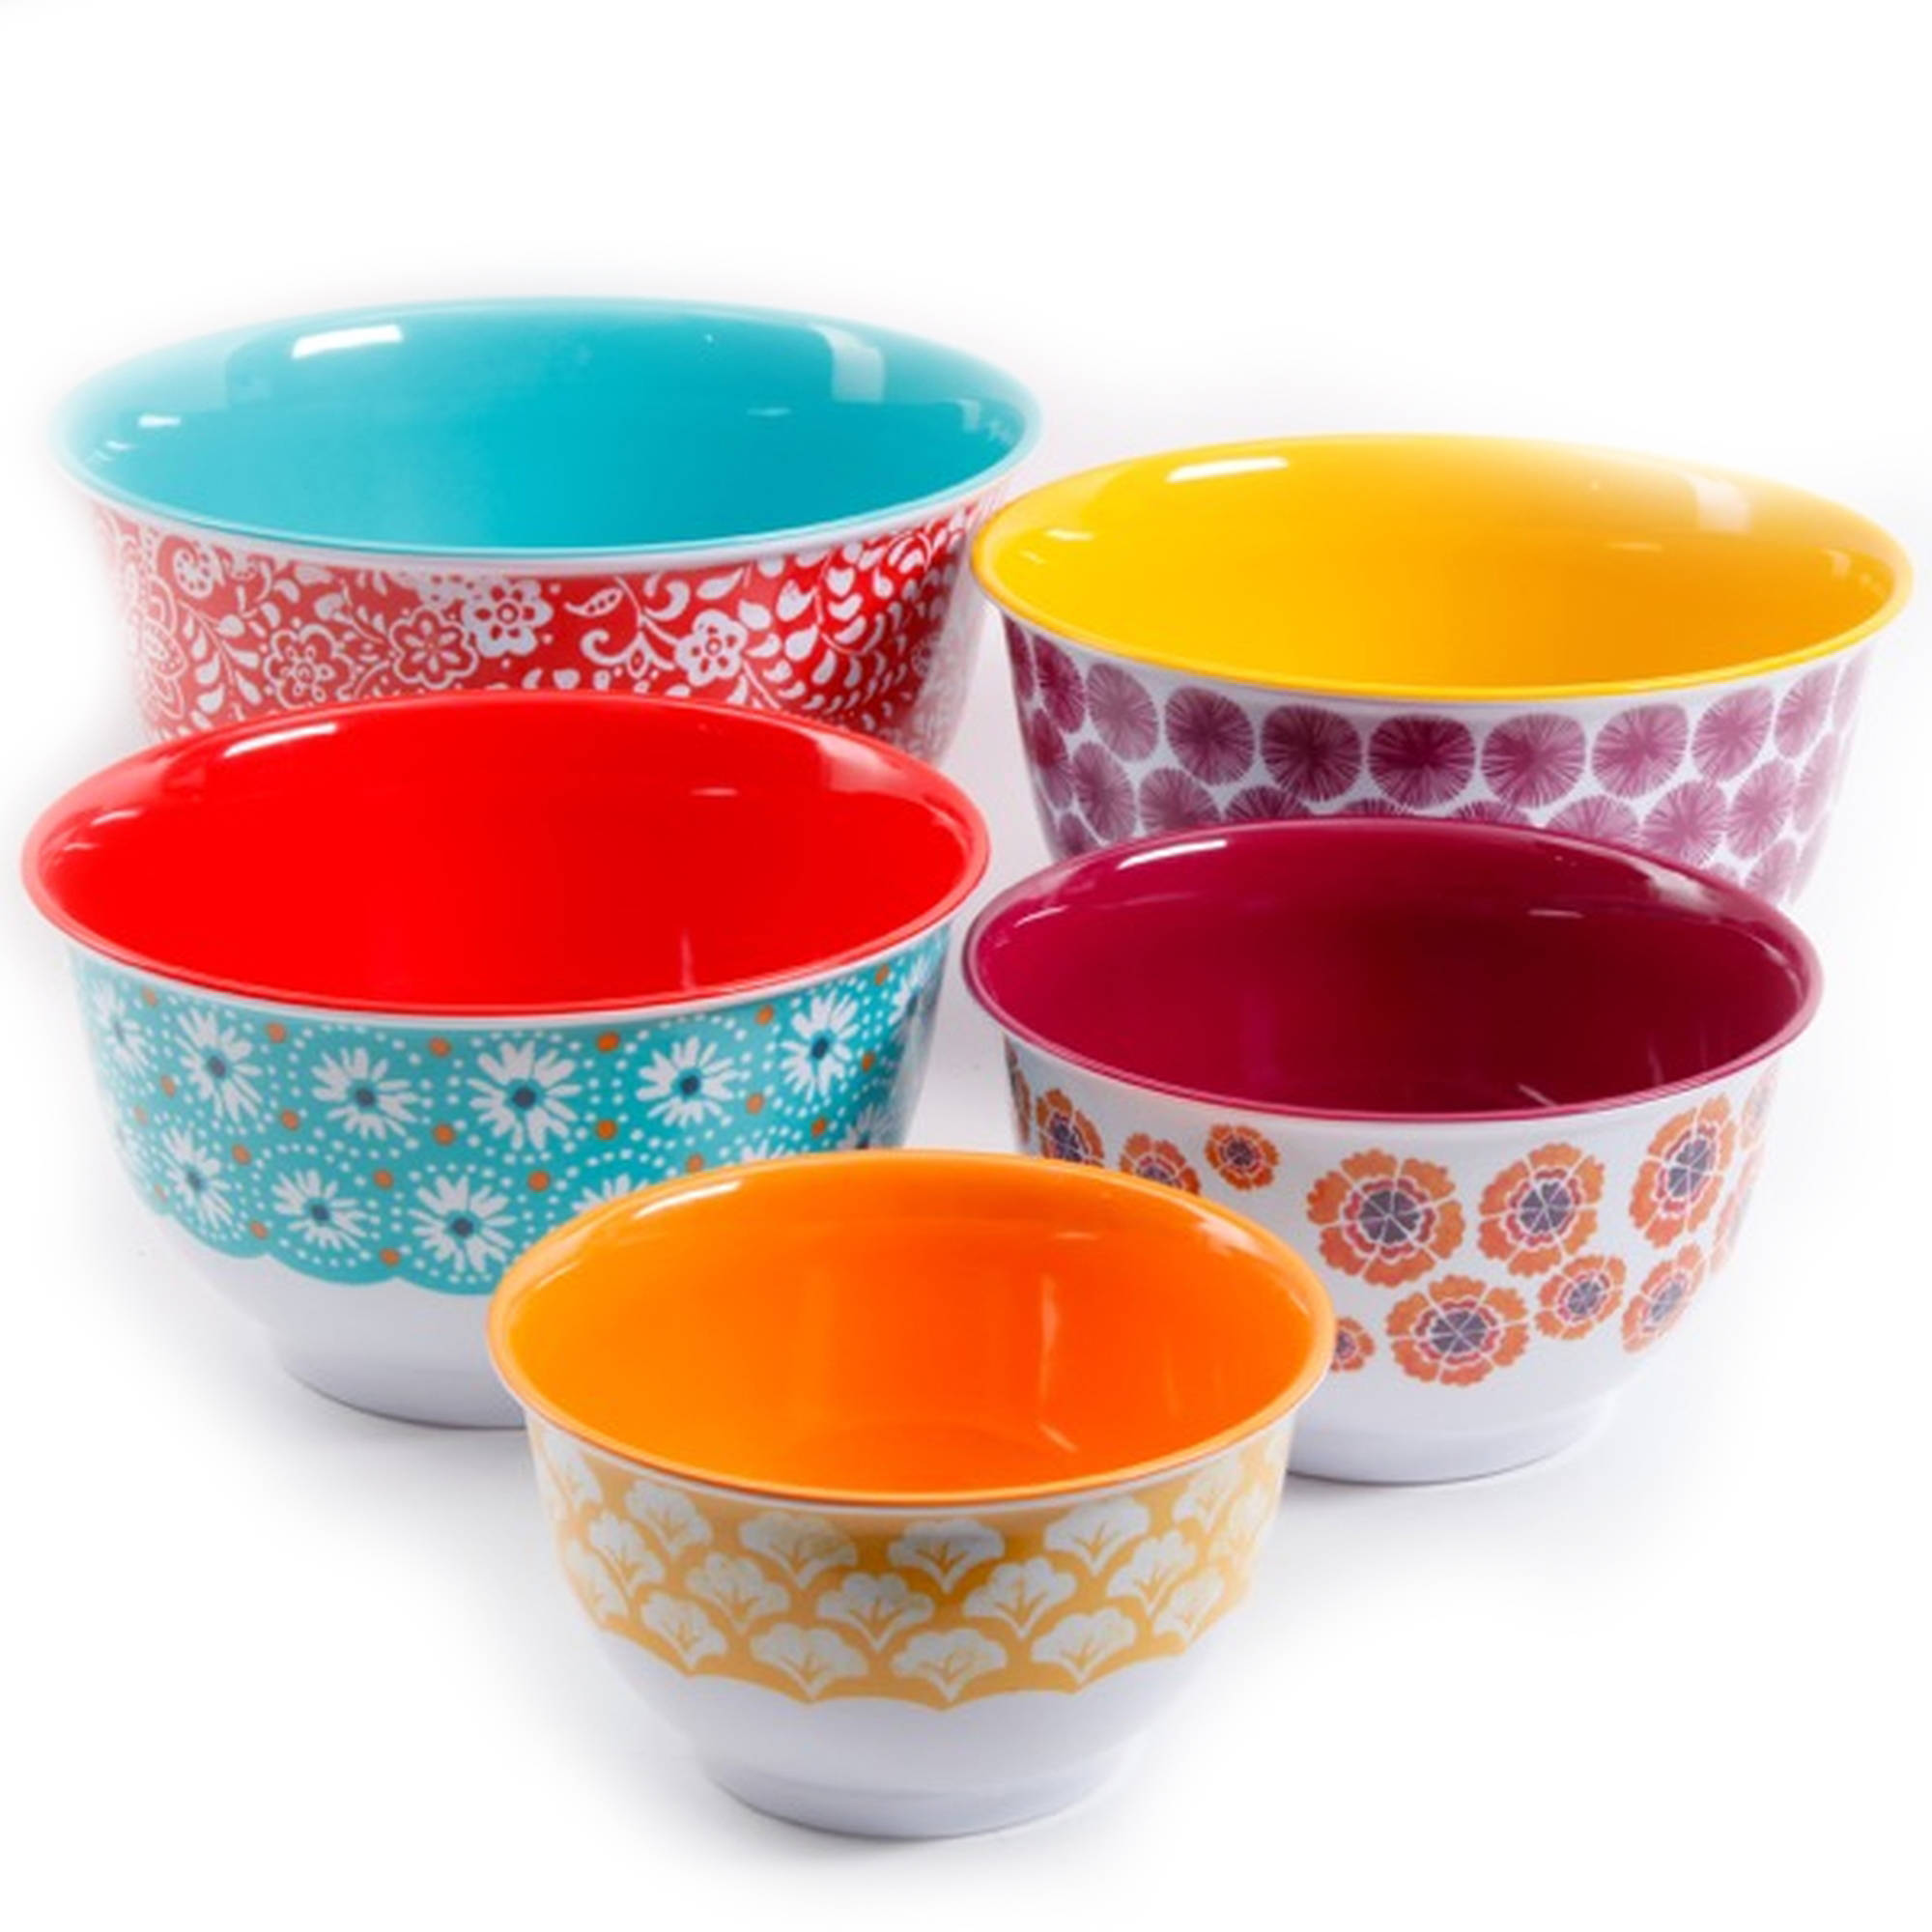 The Pioneer Woman Traveling Vines Melamine Mixing Bowl Set, 10-Piece Set - image 7 of 8